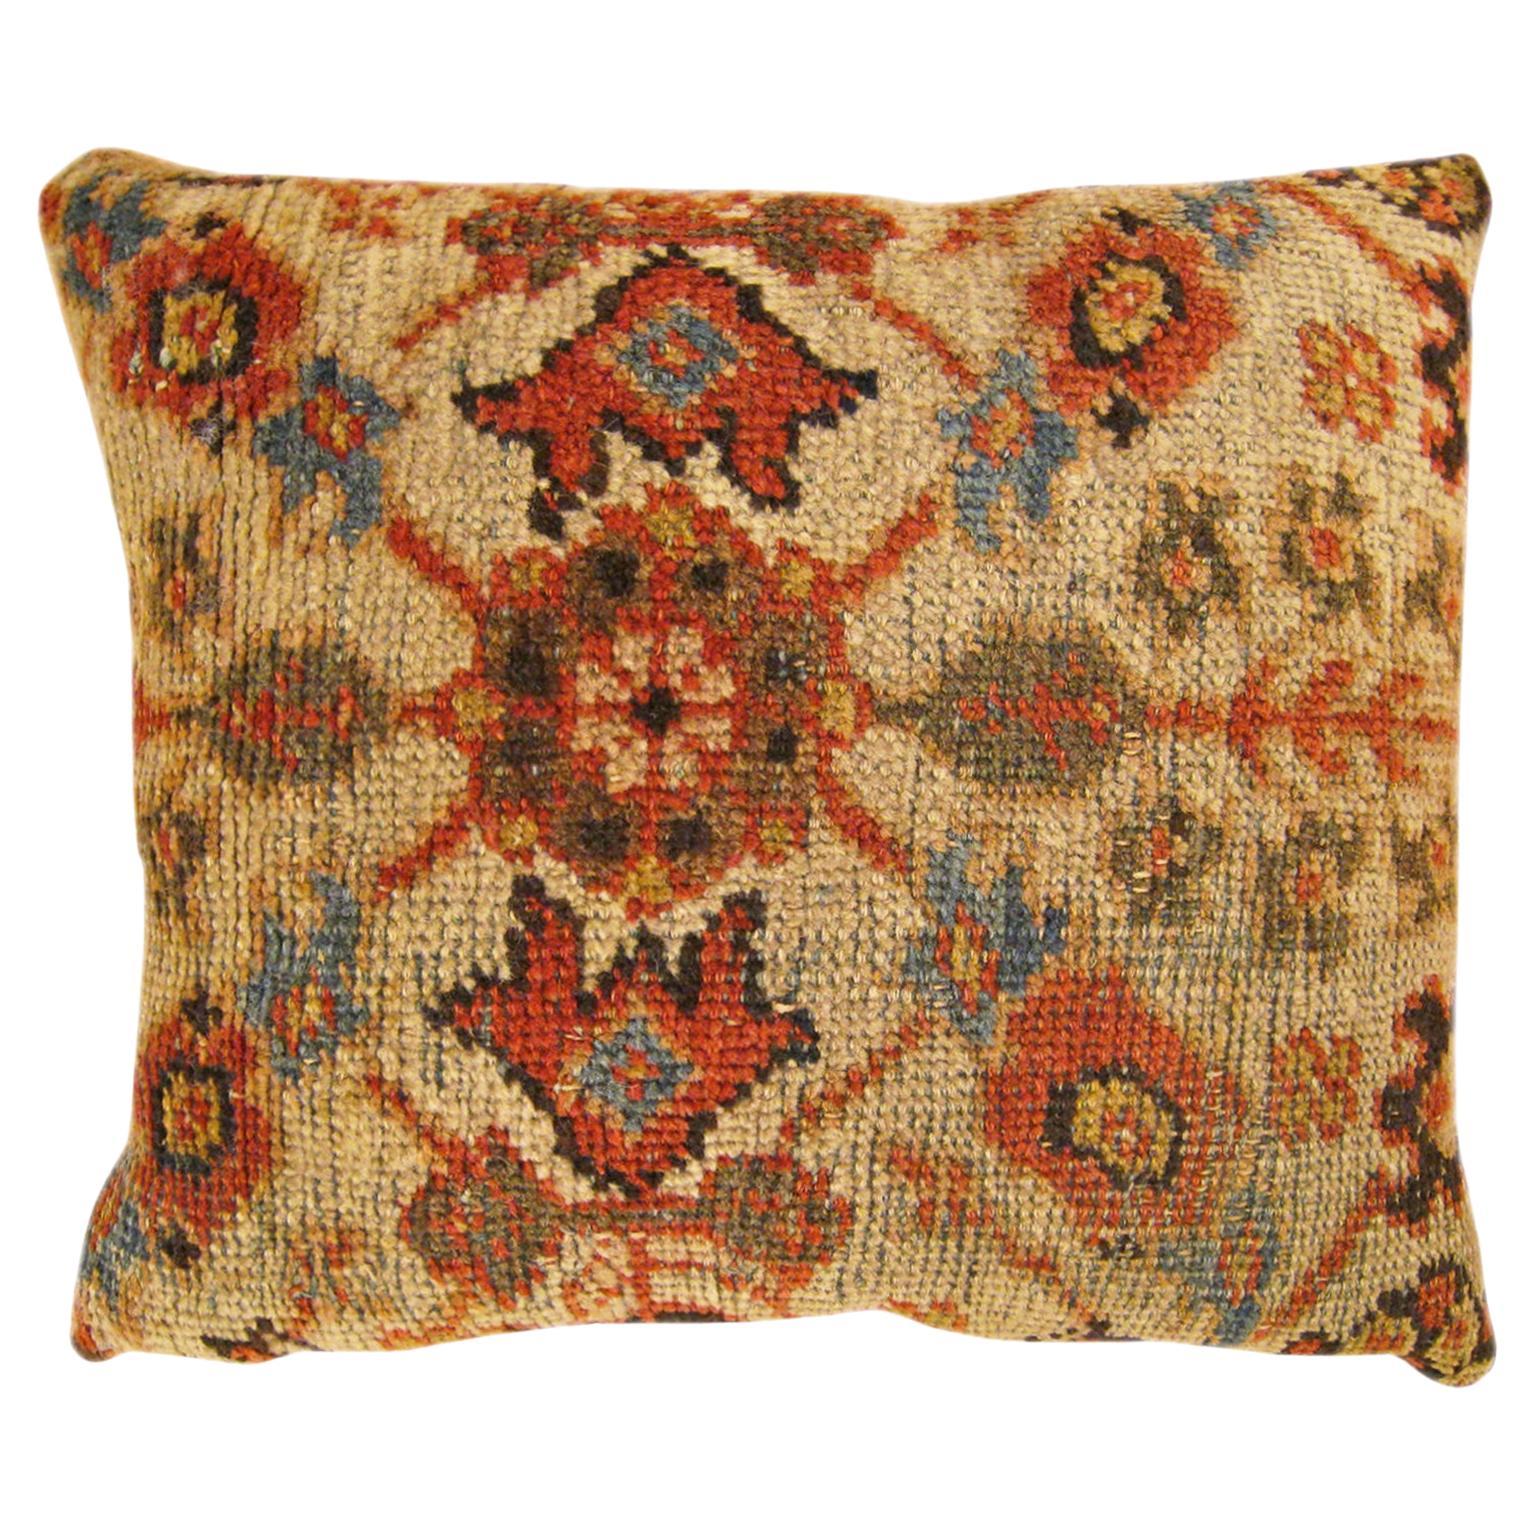 Decorative Antique Persian Sultanabad Pillow with Floral & Geometric Abstracts